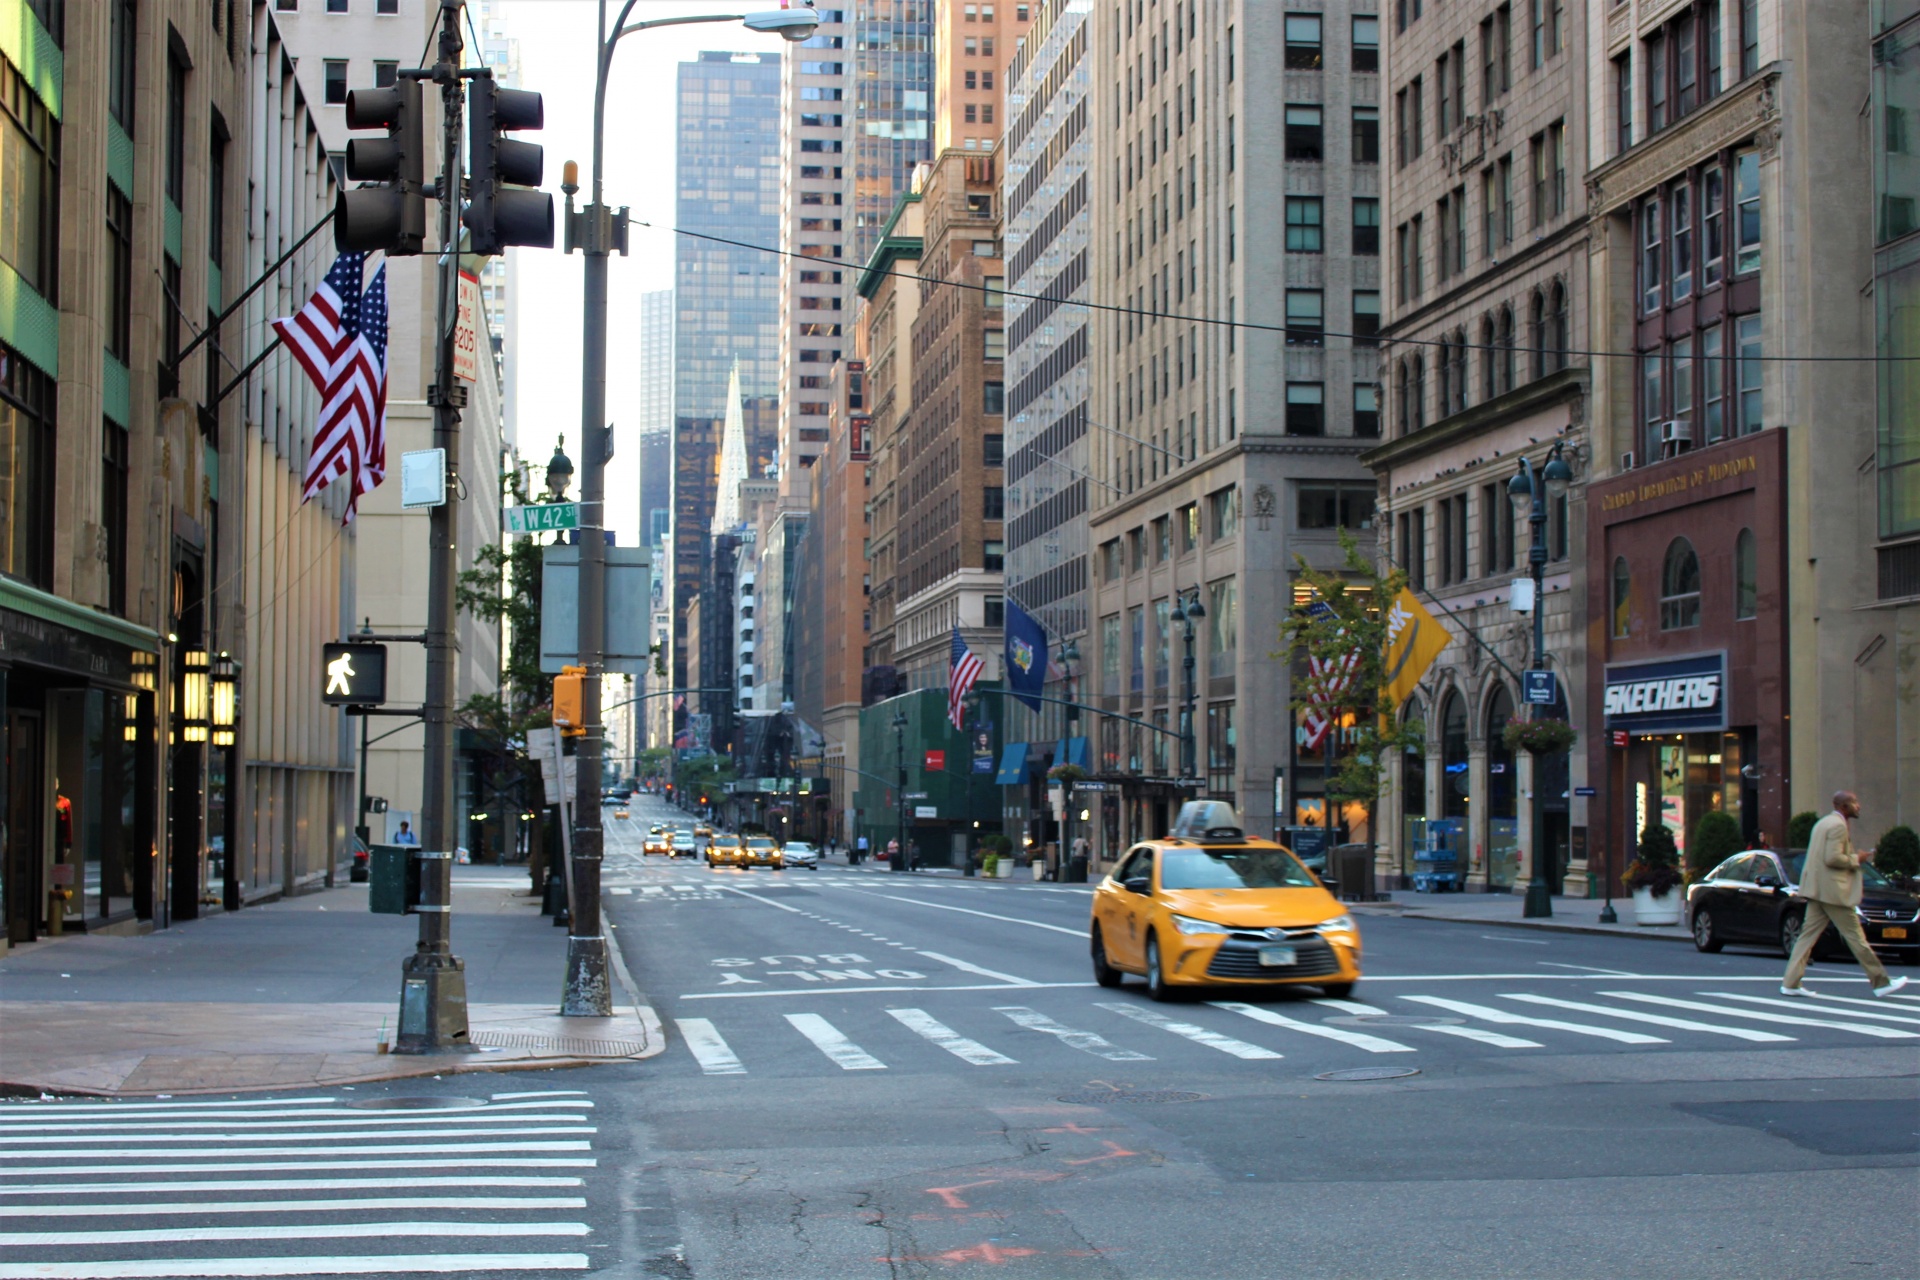 A view up New York's 5th Avenue with iconic yellow taxis